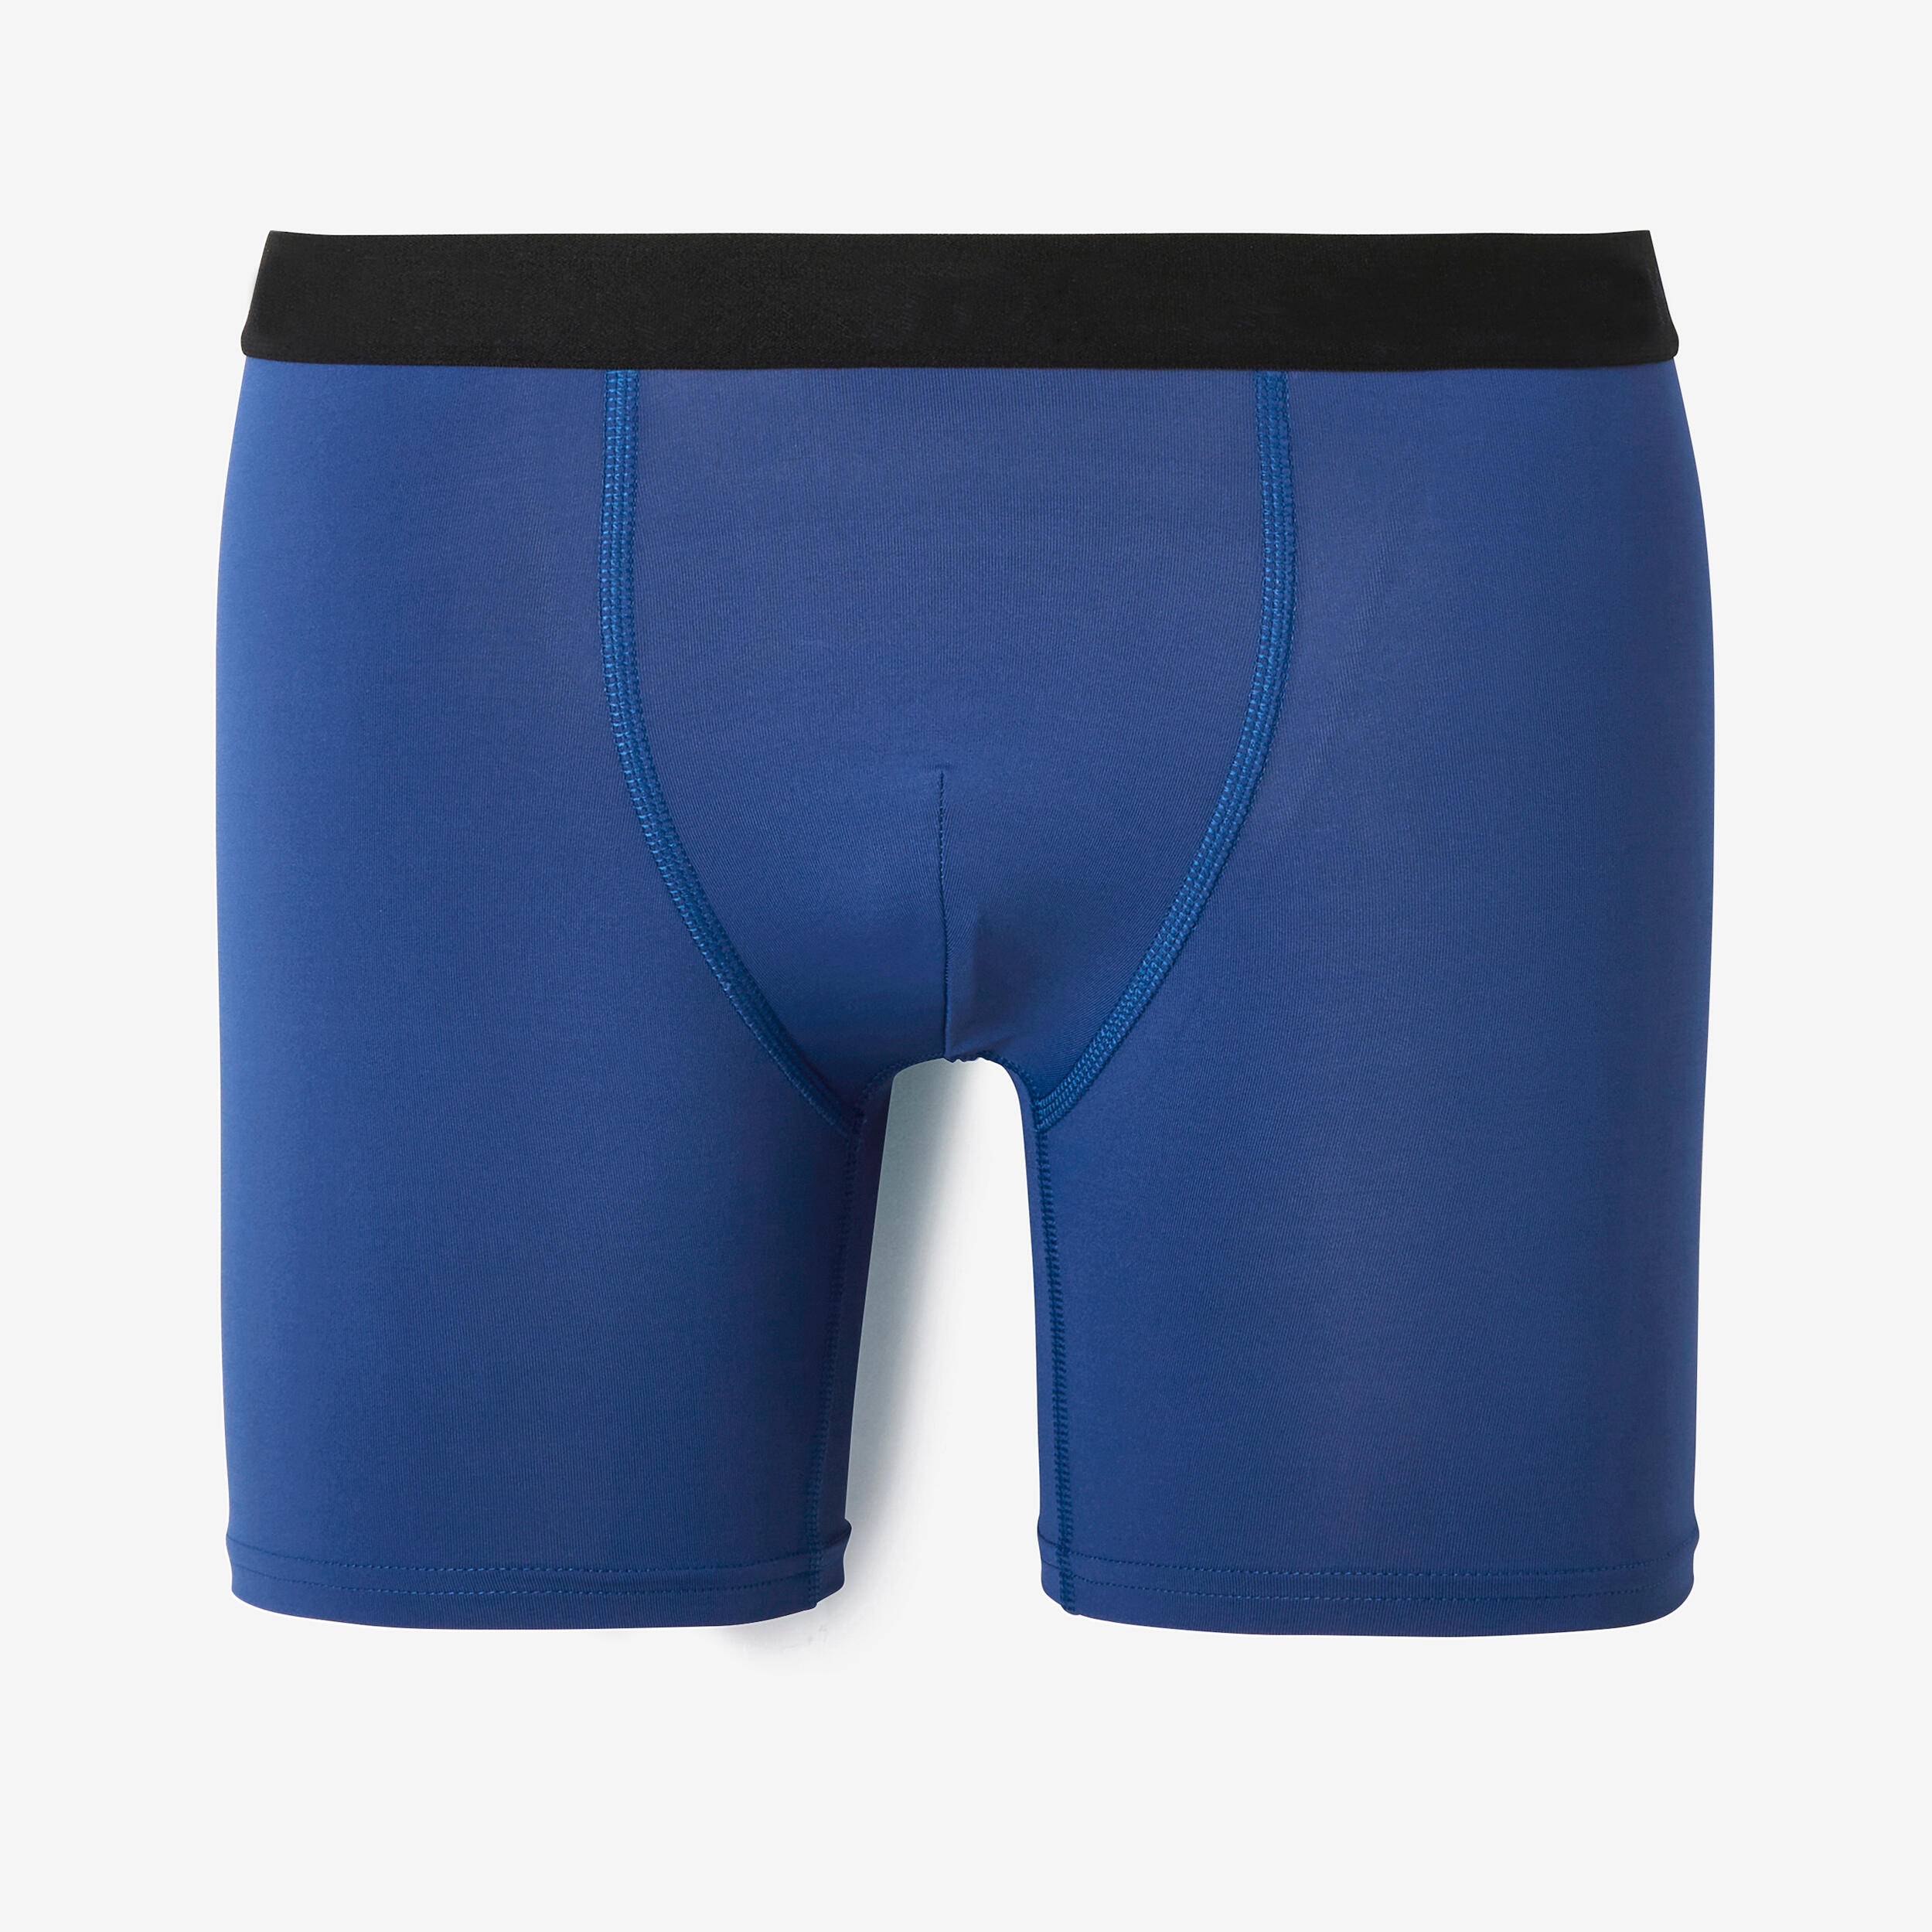 Kalenji Men's Breathable Running Boxers in Petrol Blue, Size Small